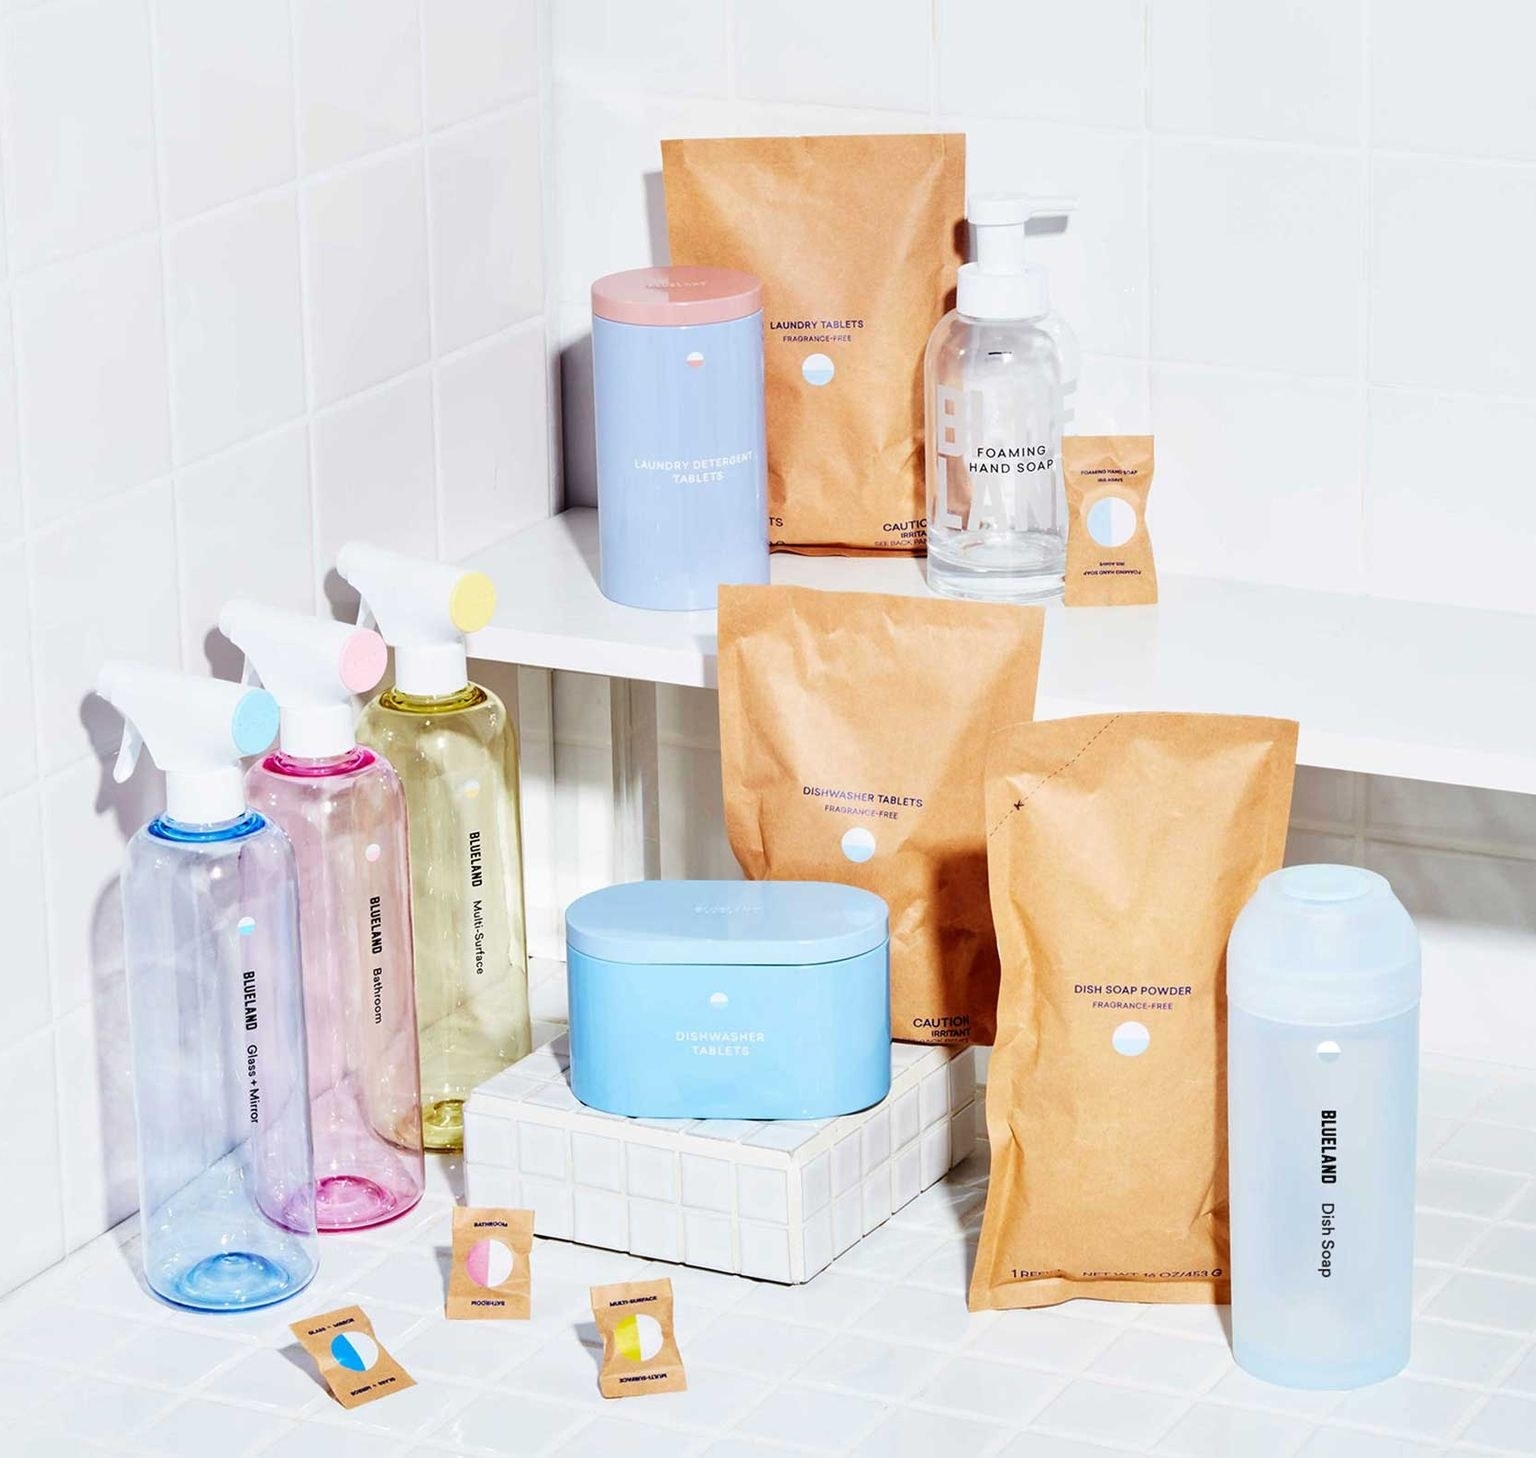 an assortment of cleaning products, multicolored bottles, paper packages, and containers against a white tile background